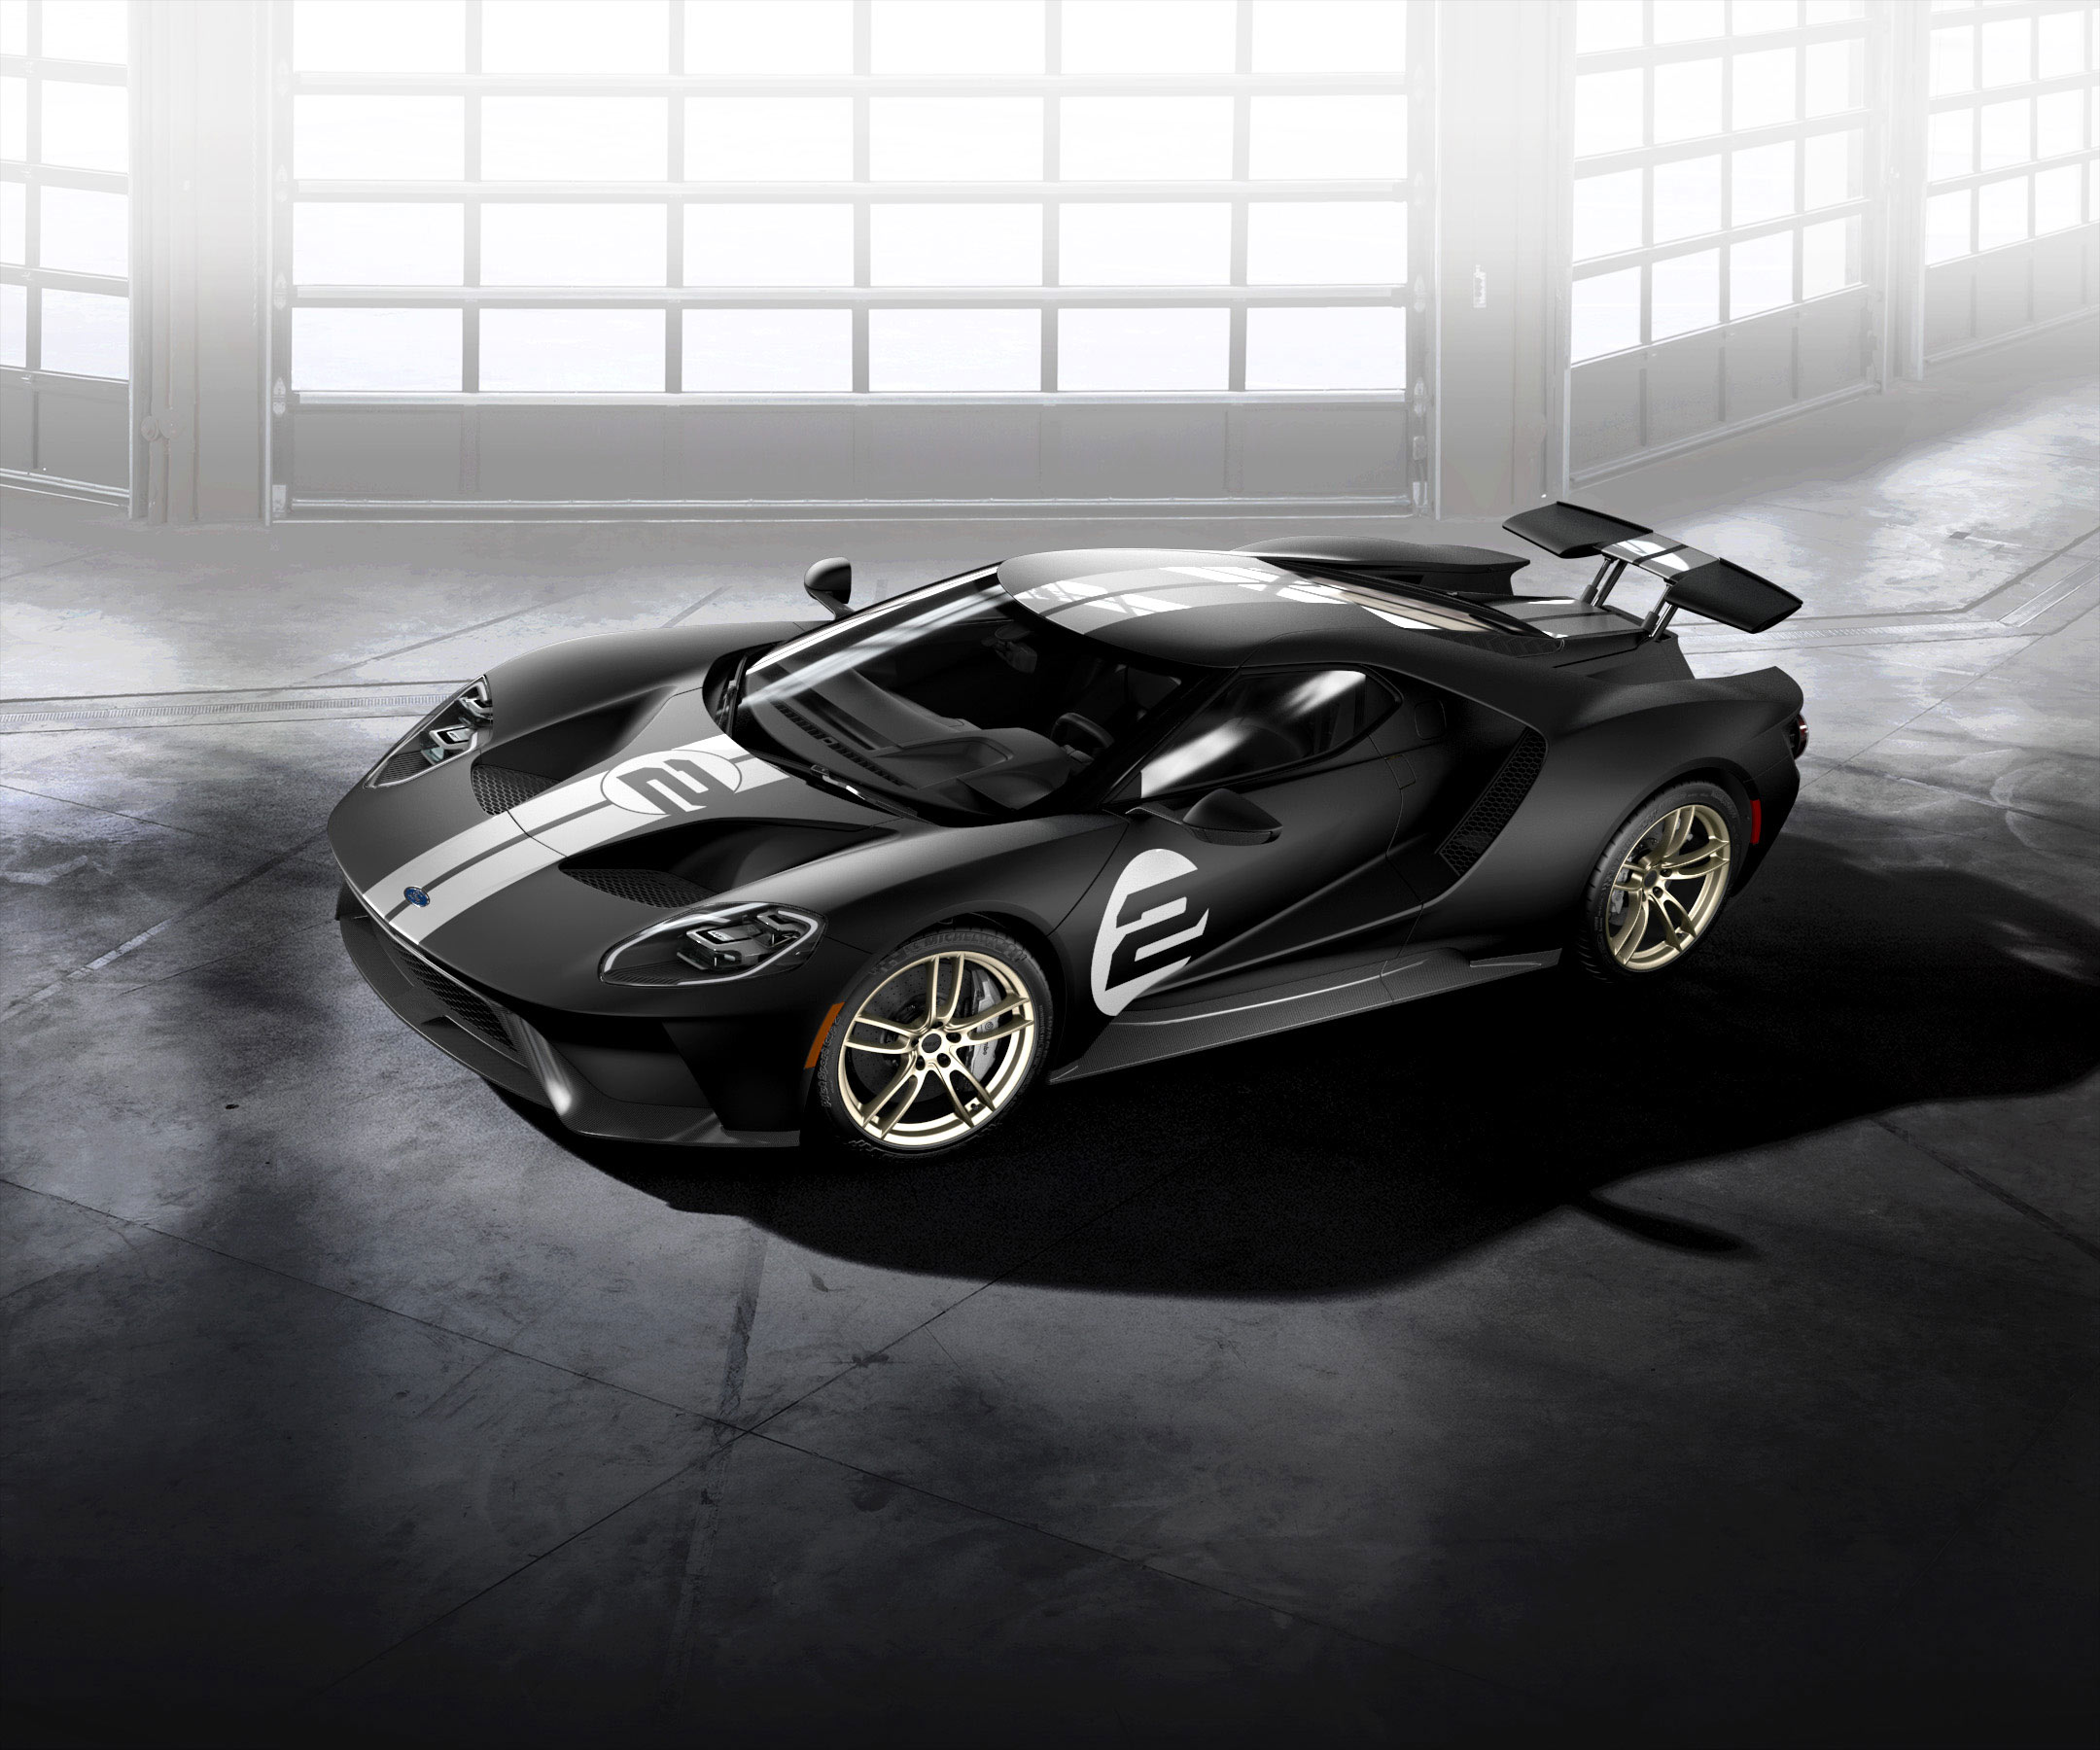 All-new Ford GT '66 Heritage Edition with unique black and silver-stripe livery celebrates 1966 Le Mans-winning GT40 Mark II race car driven by Bruce McLaren and Chris Amon